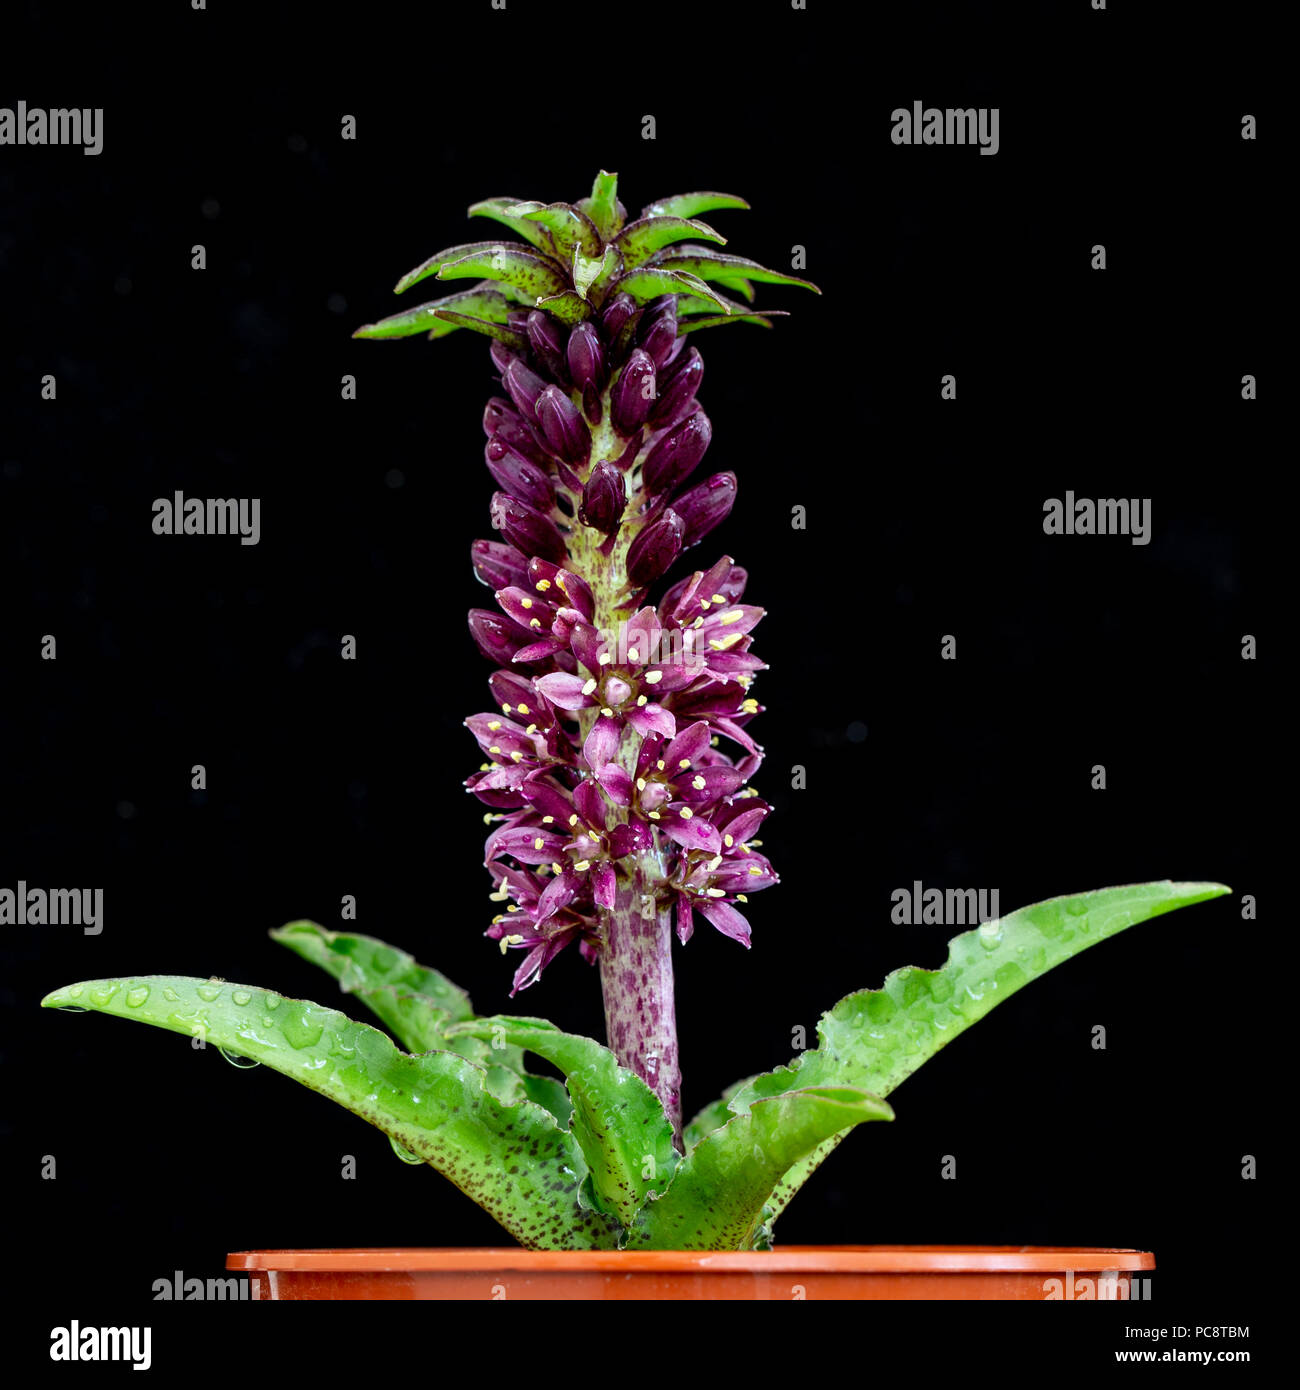 Spotted Leaf Pineapple Lily, Eucomis vandermerwei, an endangered succulent bulb from South Africa, family Hyacinthaceae Stock Photo